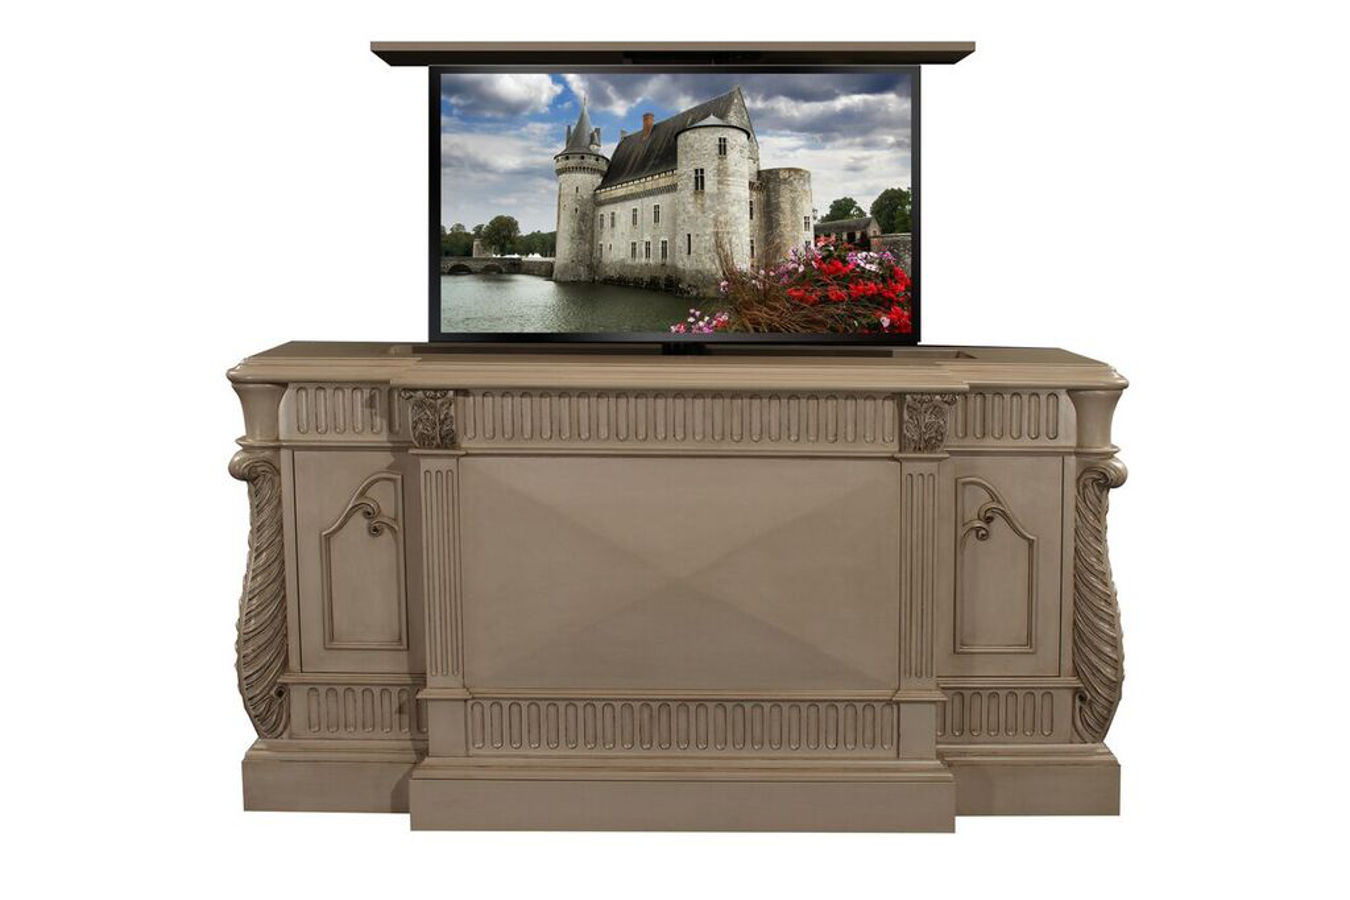 TV Lift cabinet kit rosela is handcarved and built toâ€¦ge flat screen